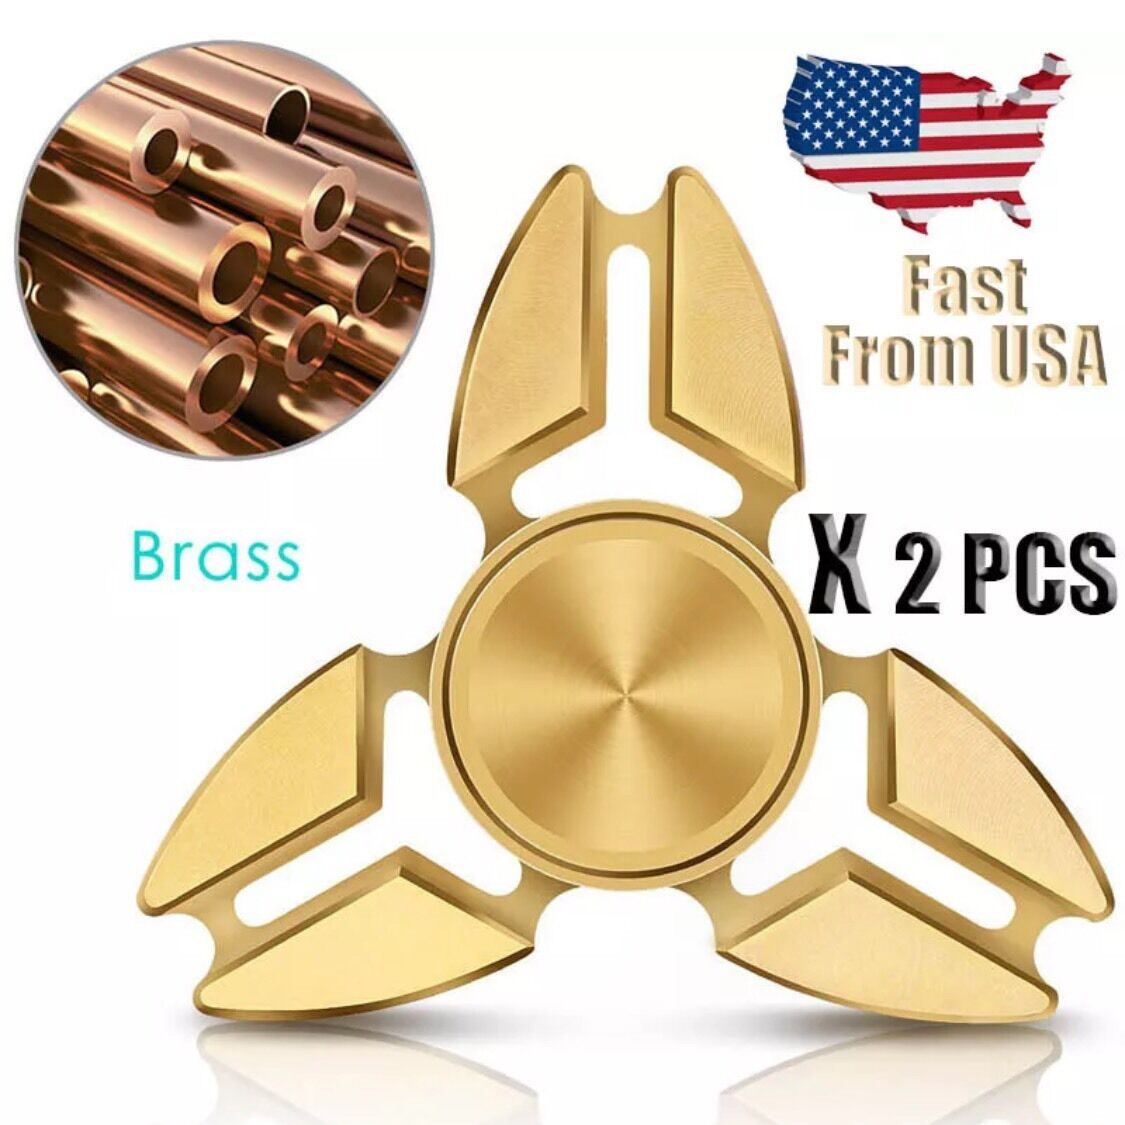 2pcs PURE BRASS Fidget Spinner High Speed . Combine Your Own From 5 Color .